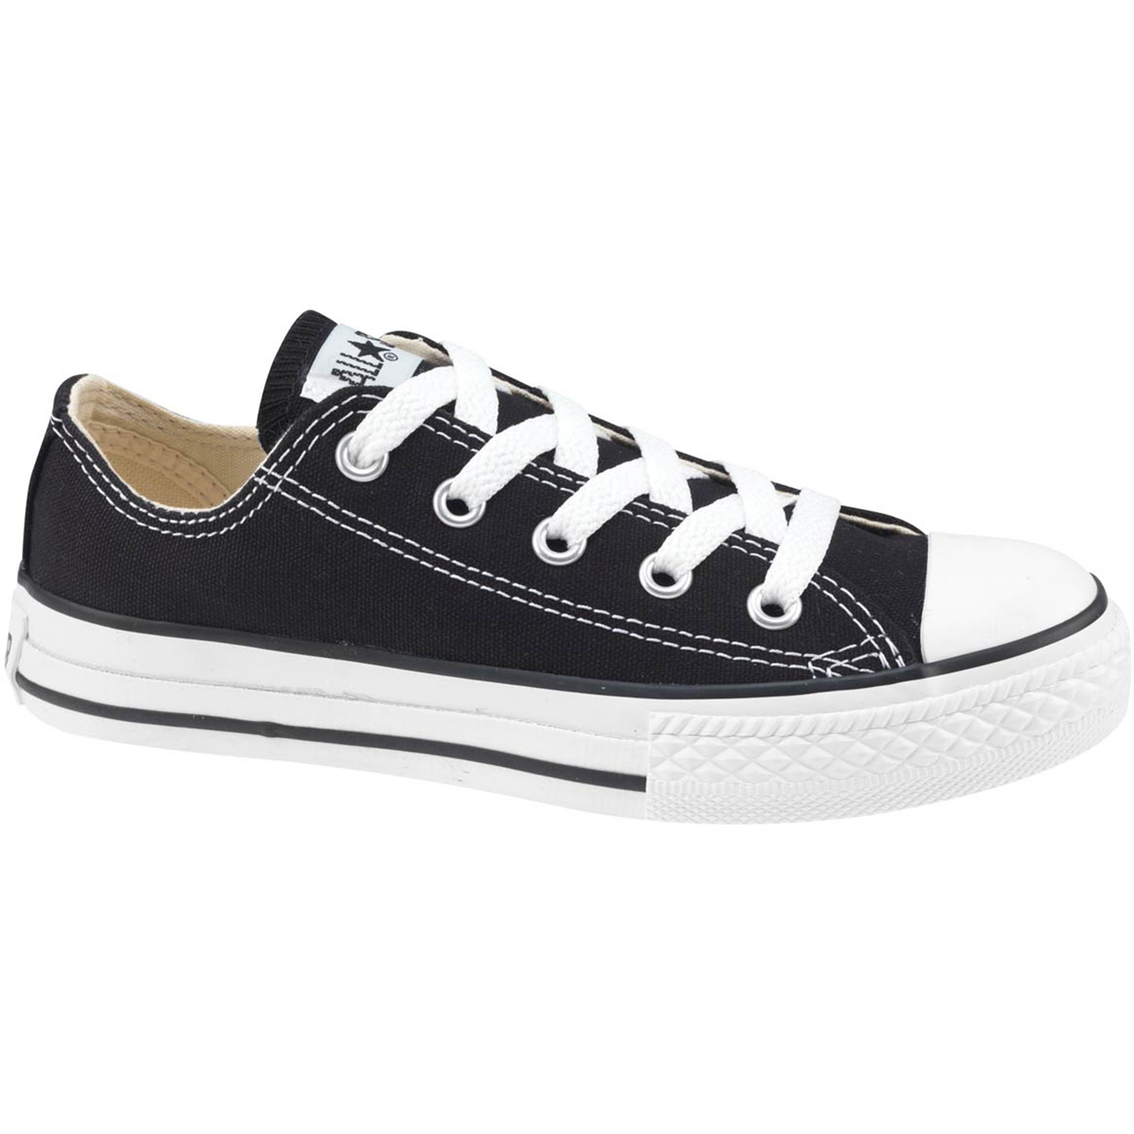 Converse Kids Chuck Taylor All Star Ox Sneakers | Sneakers | Shoes ...